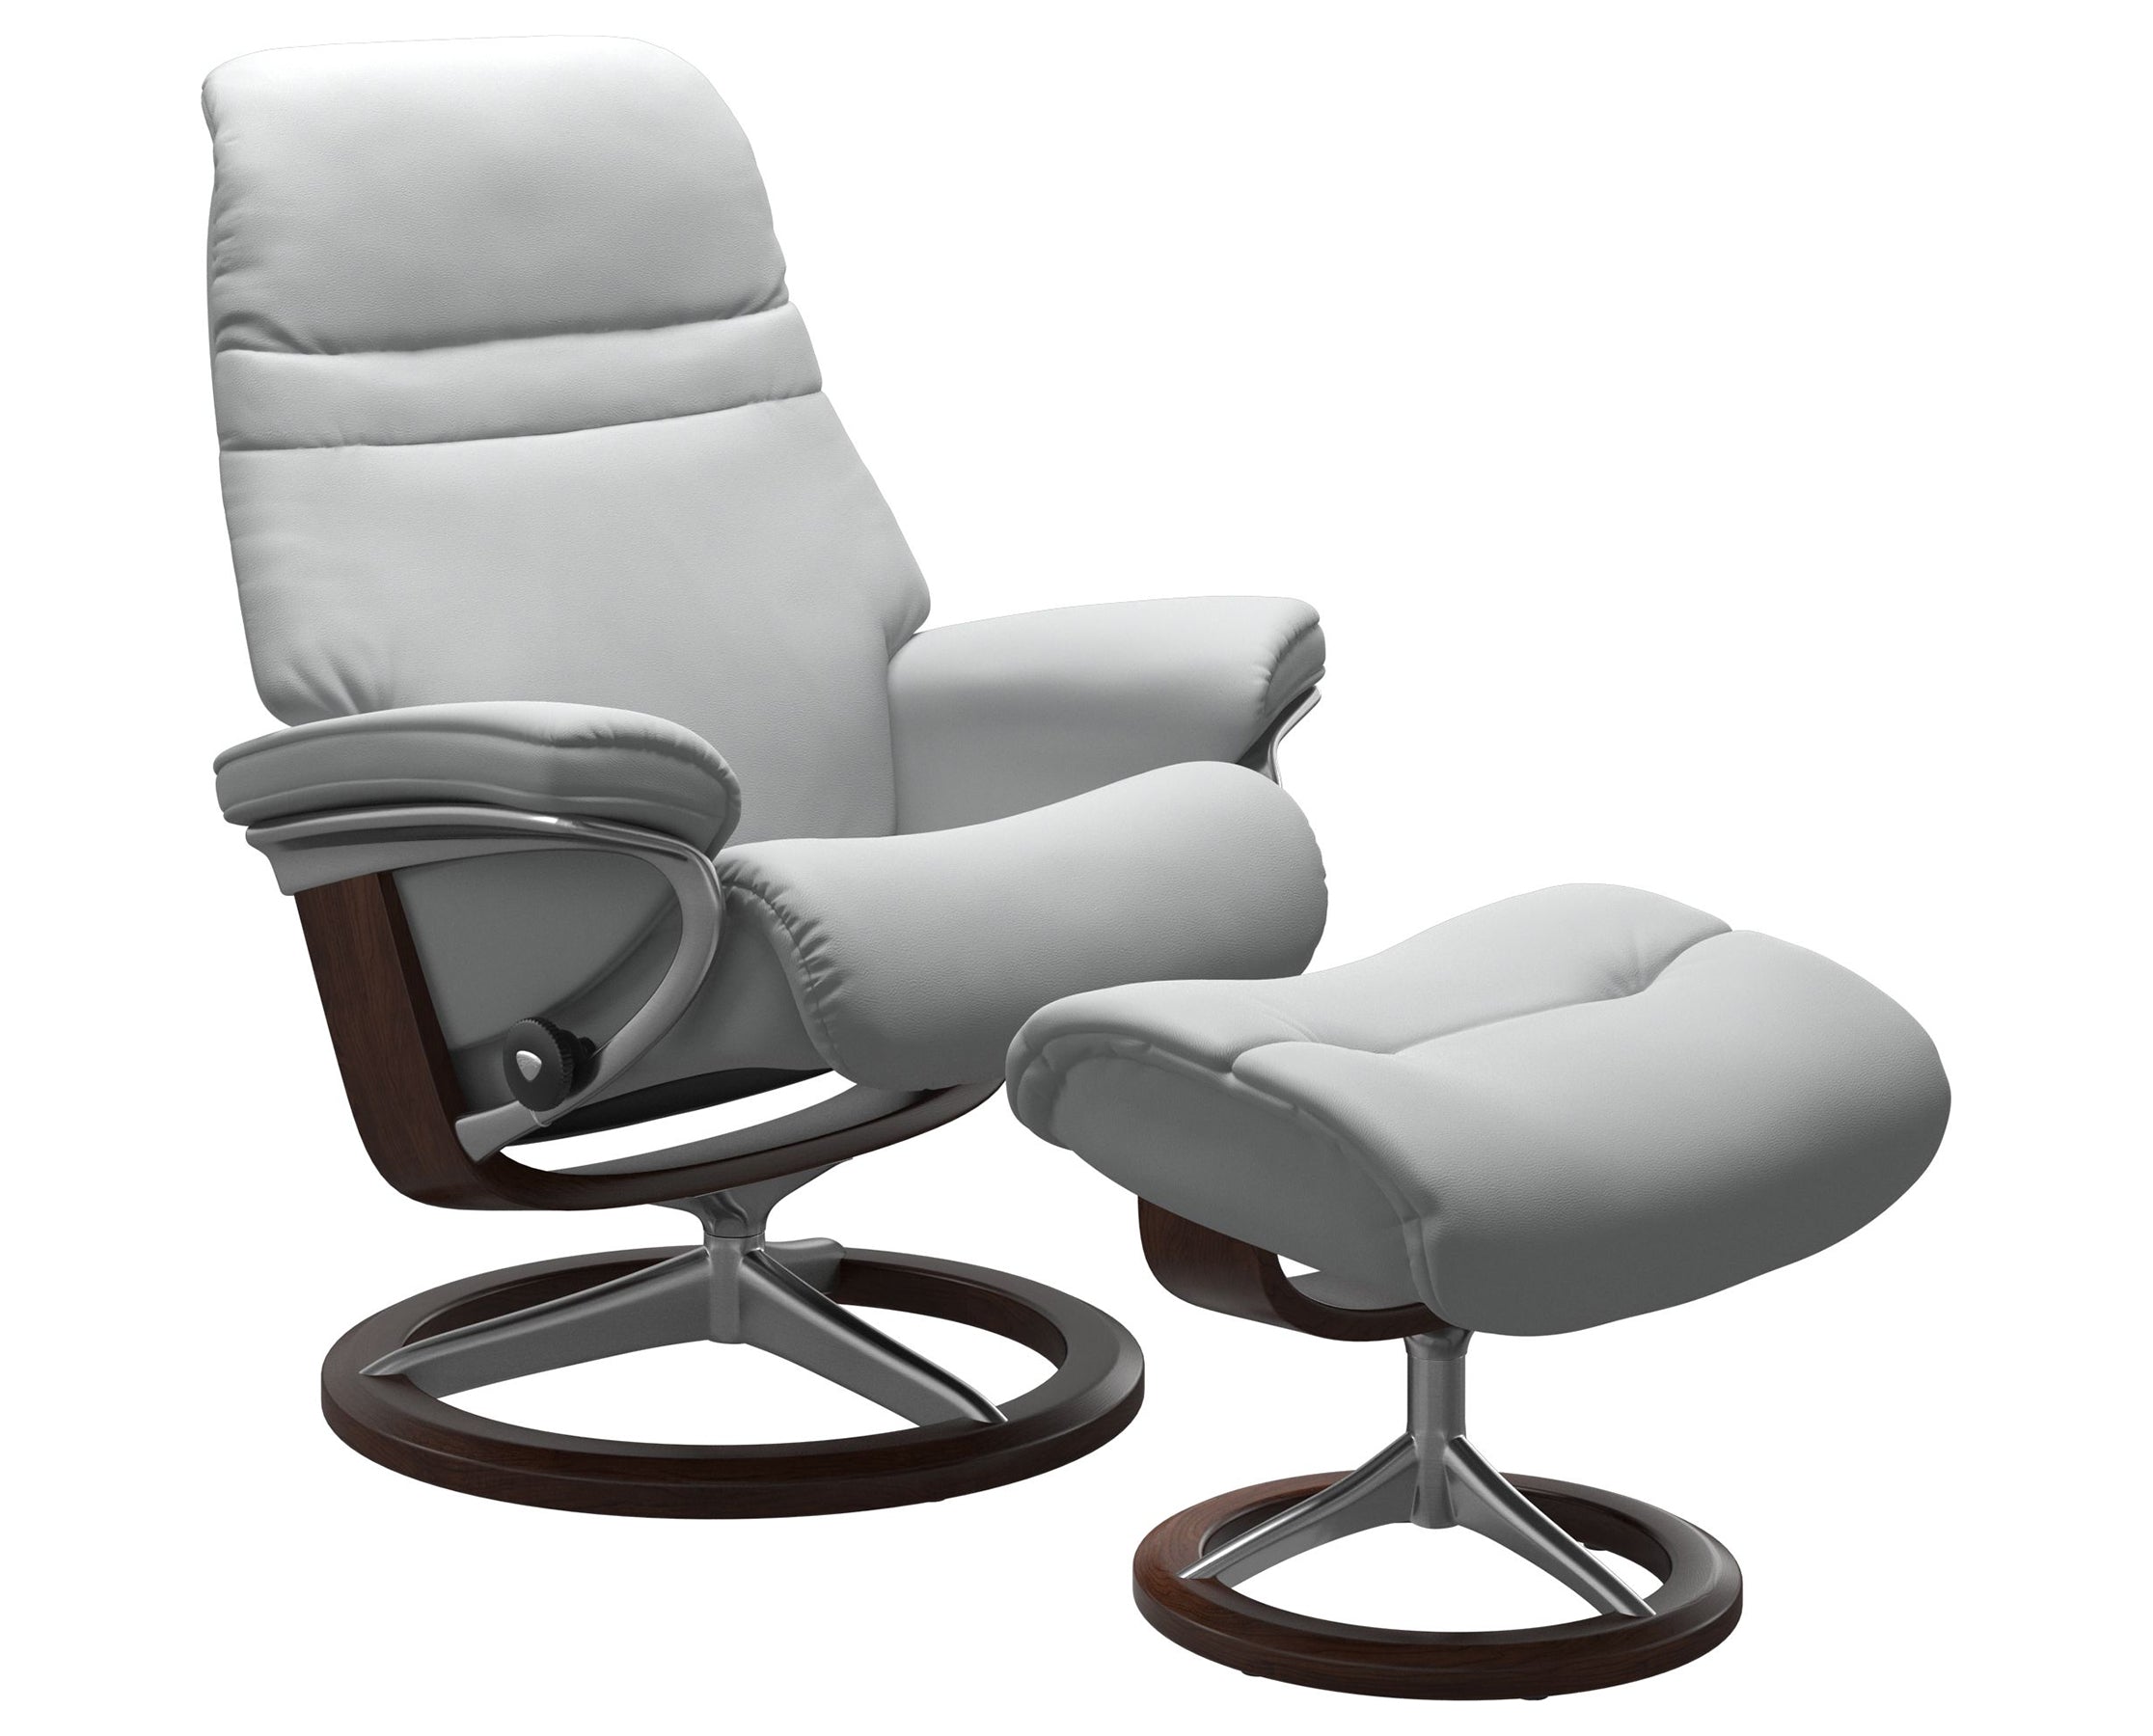 Paloma Leather Misty Grey S/M/L and Brown Base | Stressless Sunrise Signature Recliner | Valley Ridge Furniture